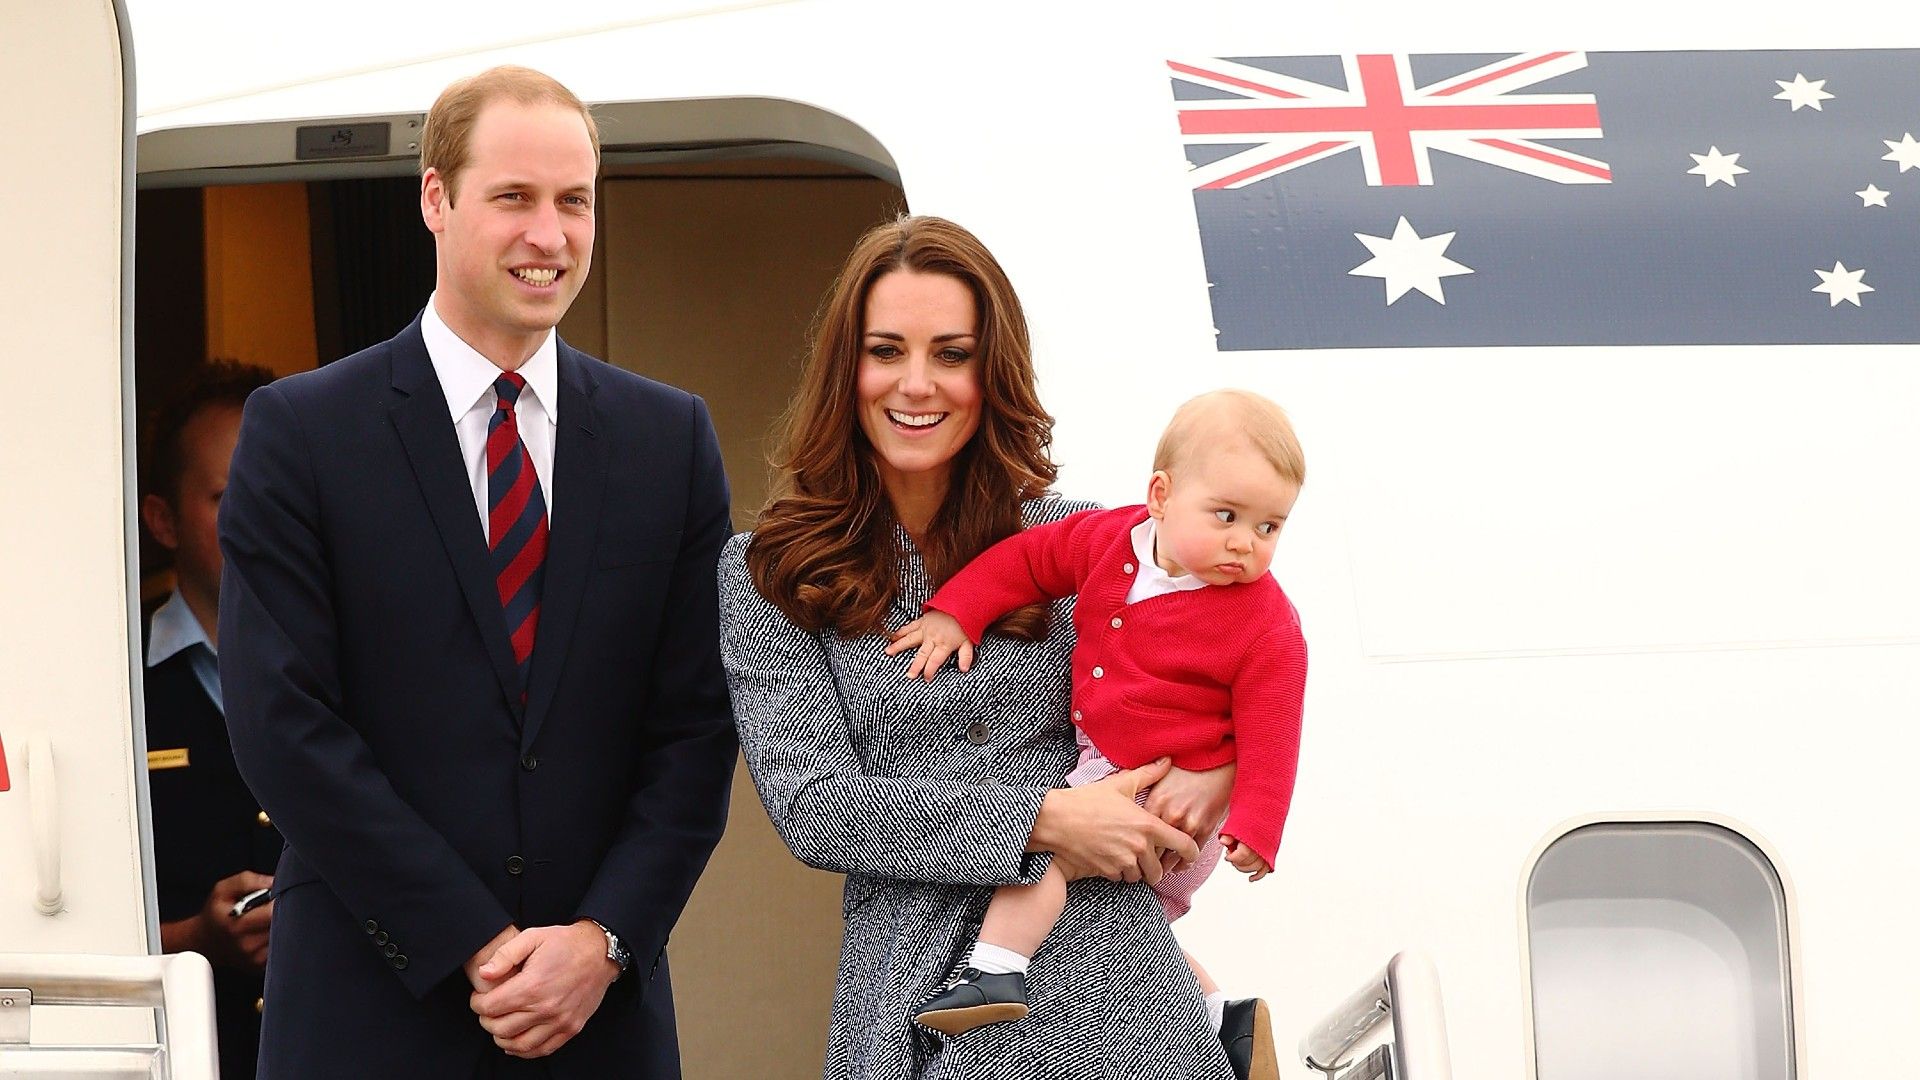 <p>                     Baby on board - Prince William and Kate Middleton made sure their 2014 tour of Australia and New Zealand would be one for the history books as they brought along Prince George - who was around one-year-old at the time!                   </p>                                      <p>                     Starting him young - and attempting their first major trip as a family of three - George clung to his parents as they were greeted by eager crowds.                   </p>